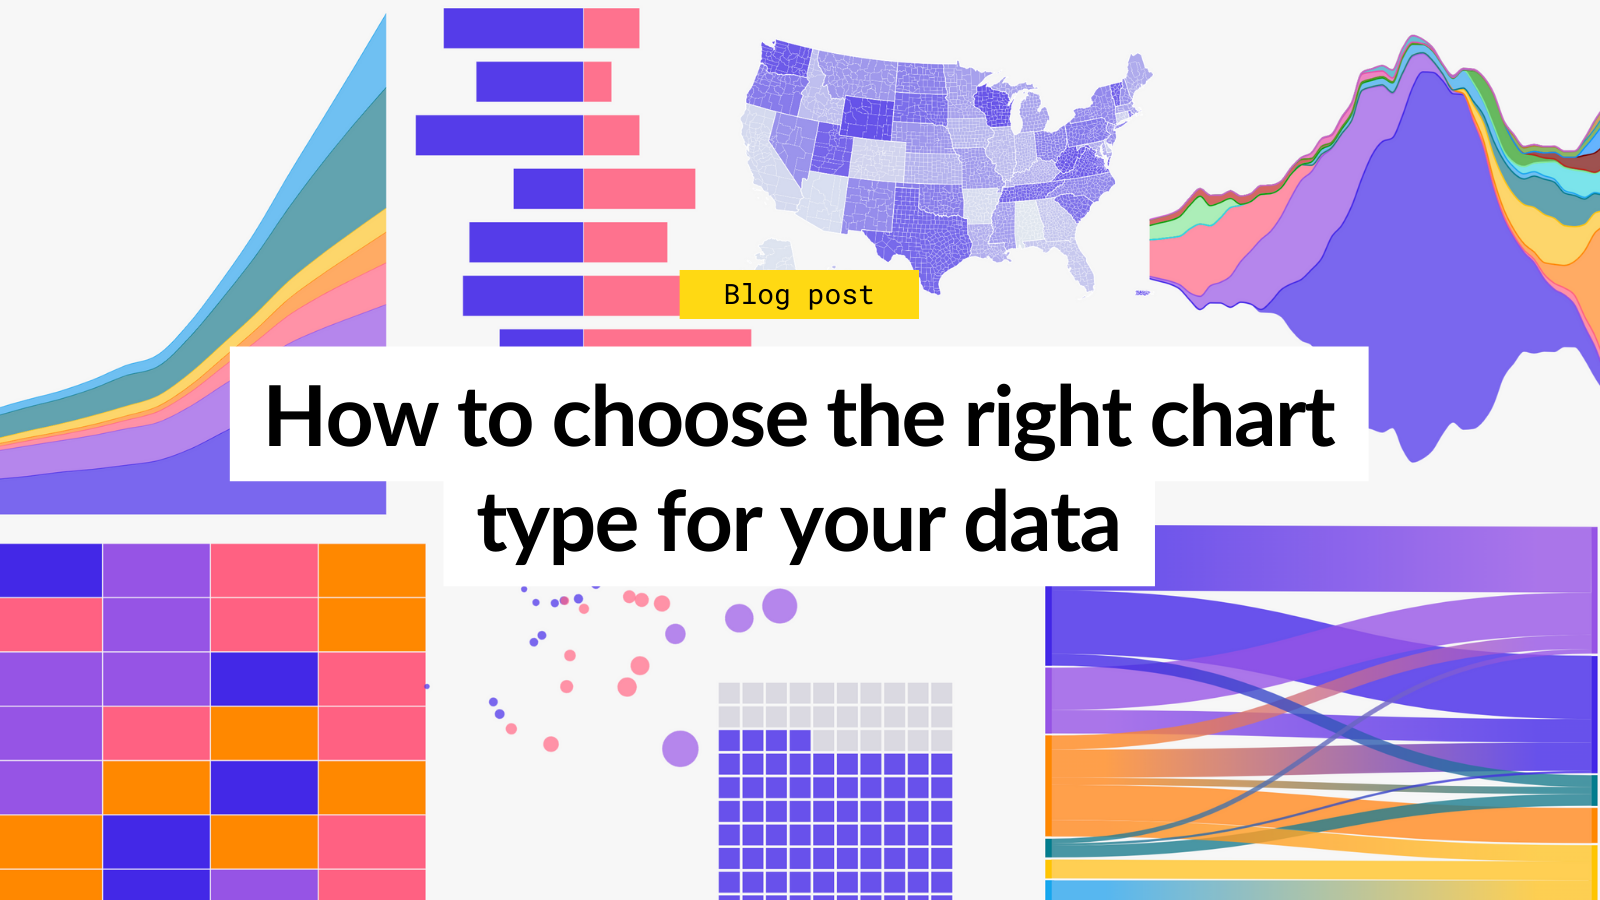 How to choose the right chart type for your data